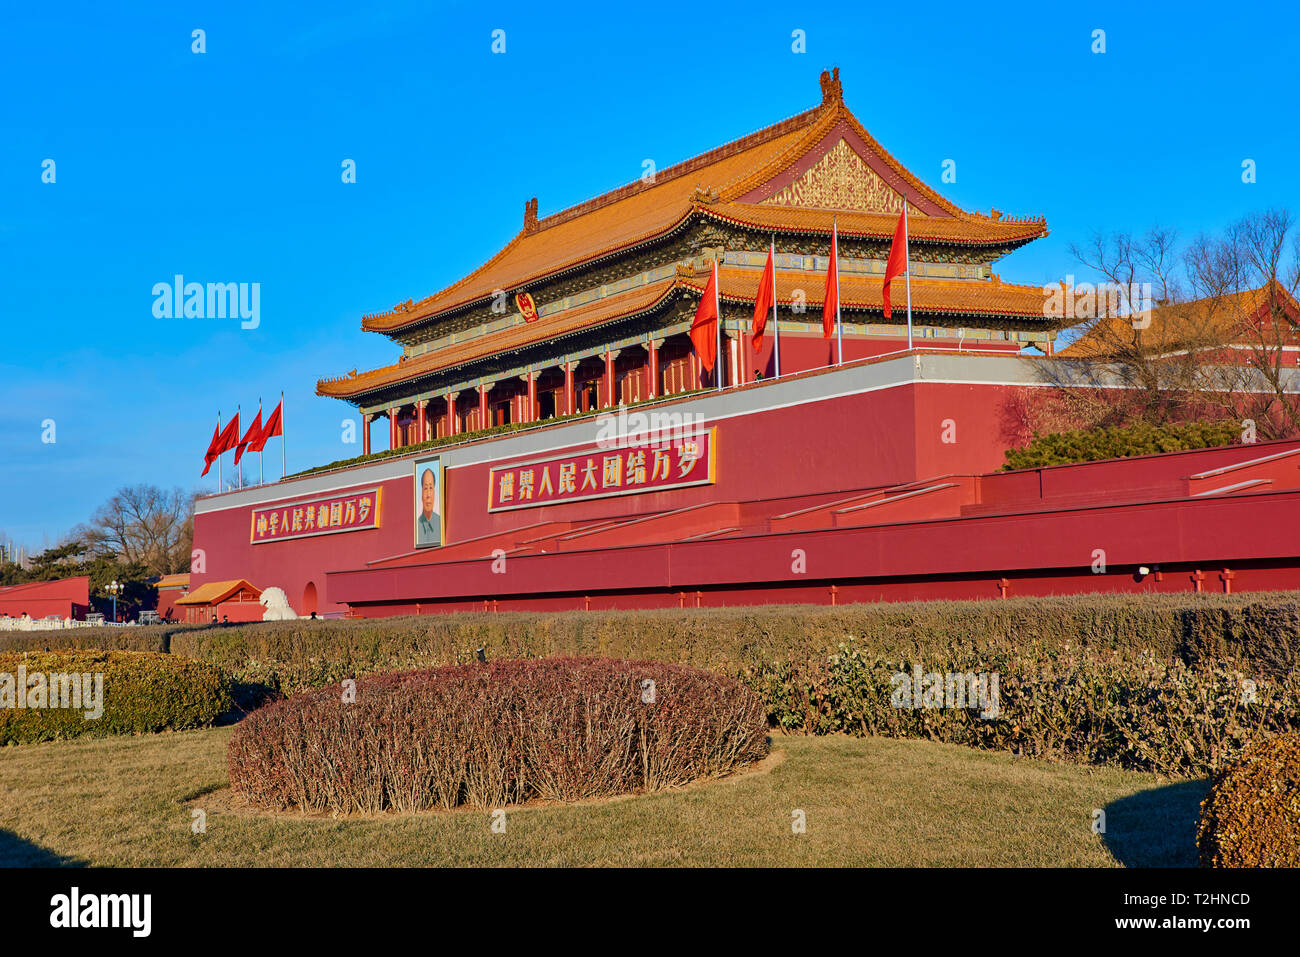 Tiananmen, or the Gate of Heavenly Peace, Forbidden City, Beijing, China, East Asia Stock Photo